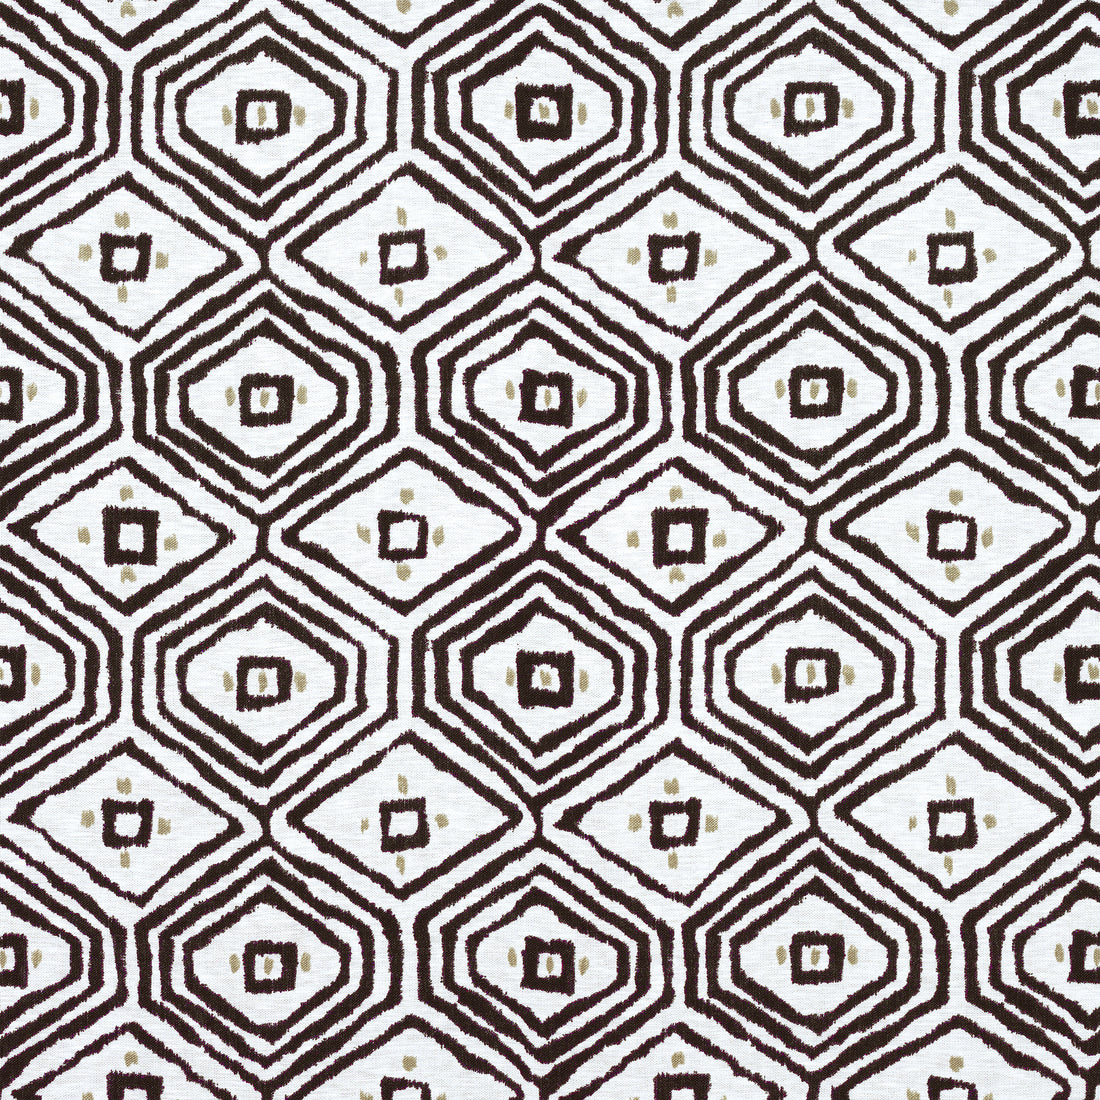 Pass-A-Grille fabric in black color - pattern number F910613 - by Thibaut in the Ceylon collection